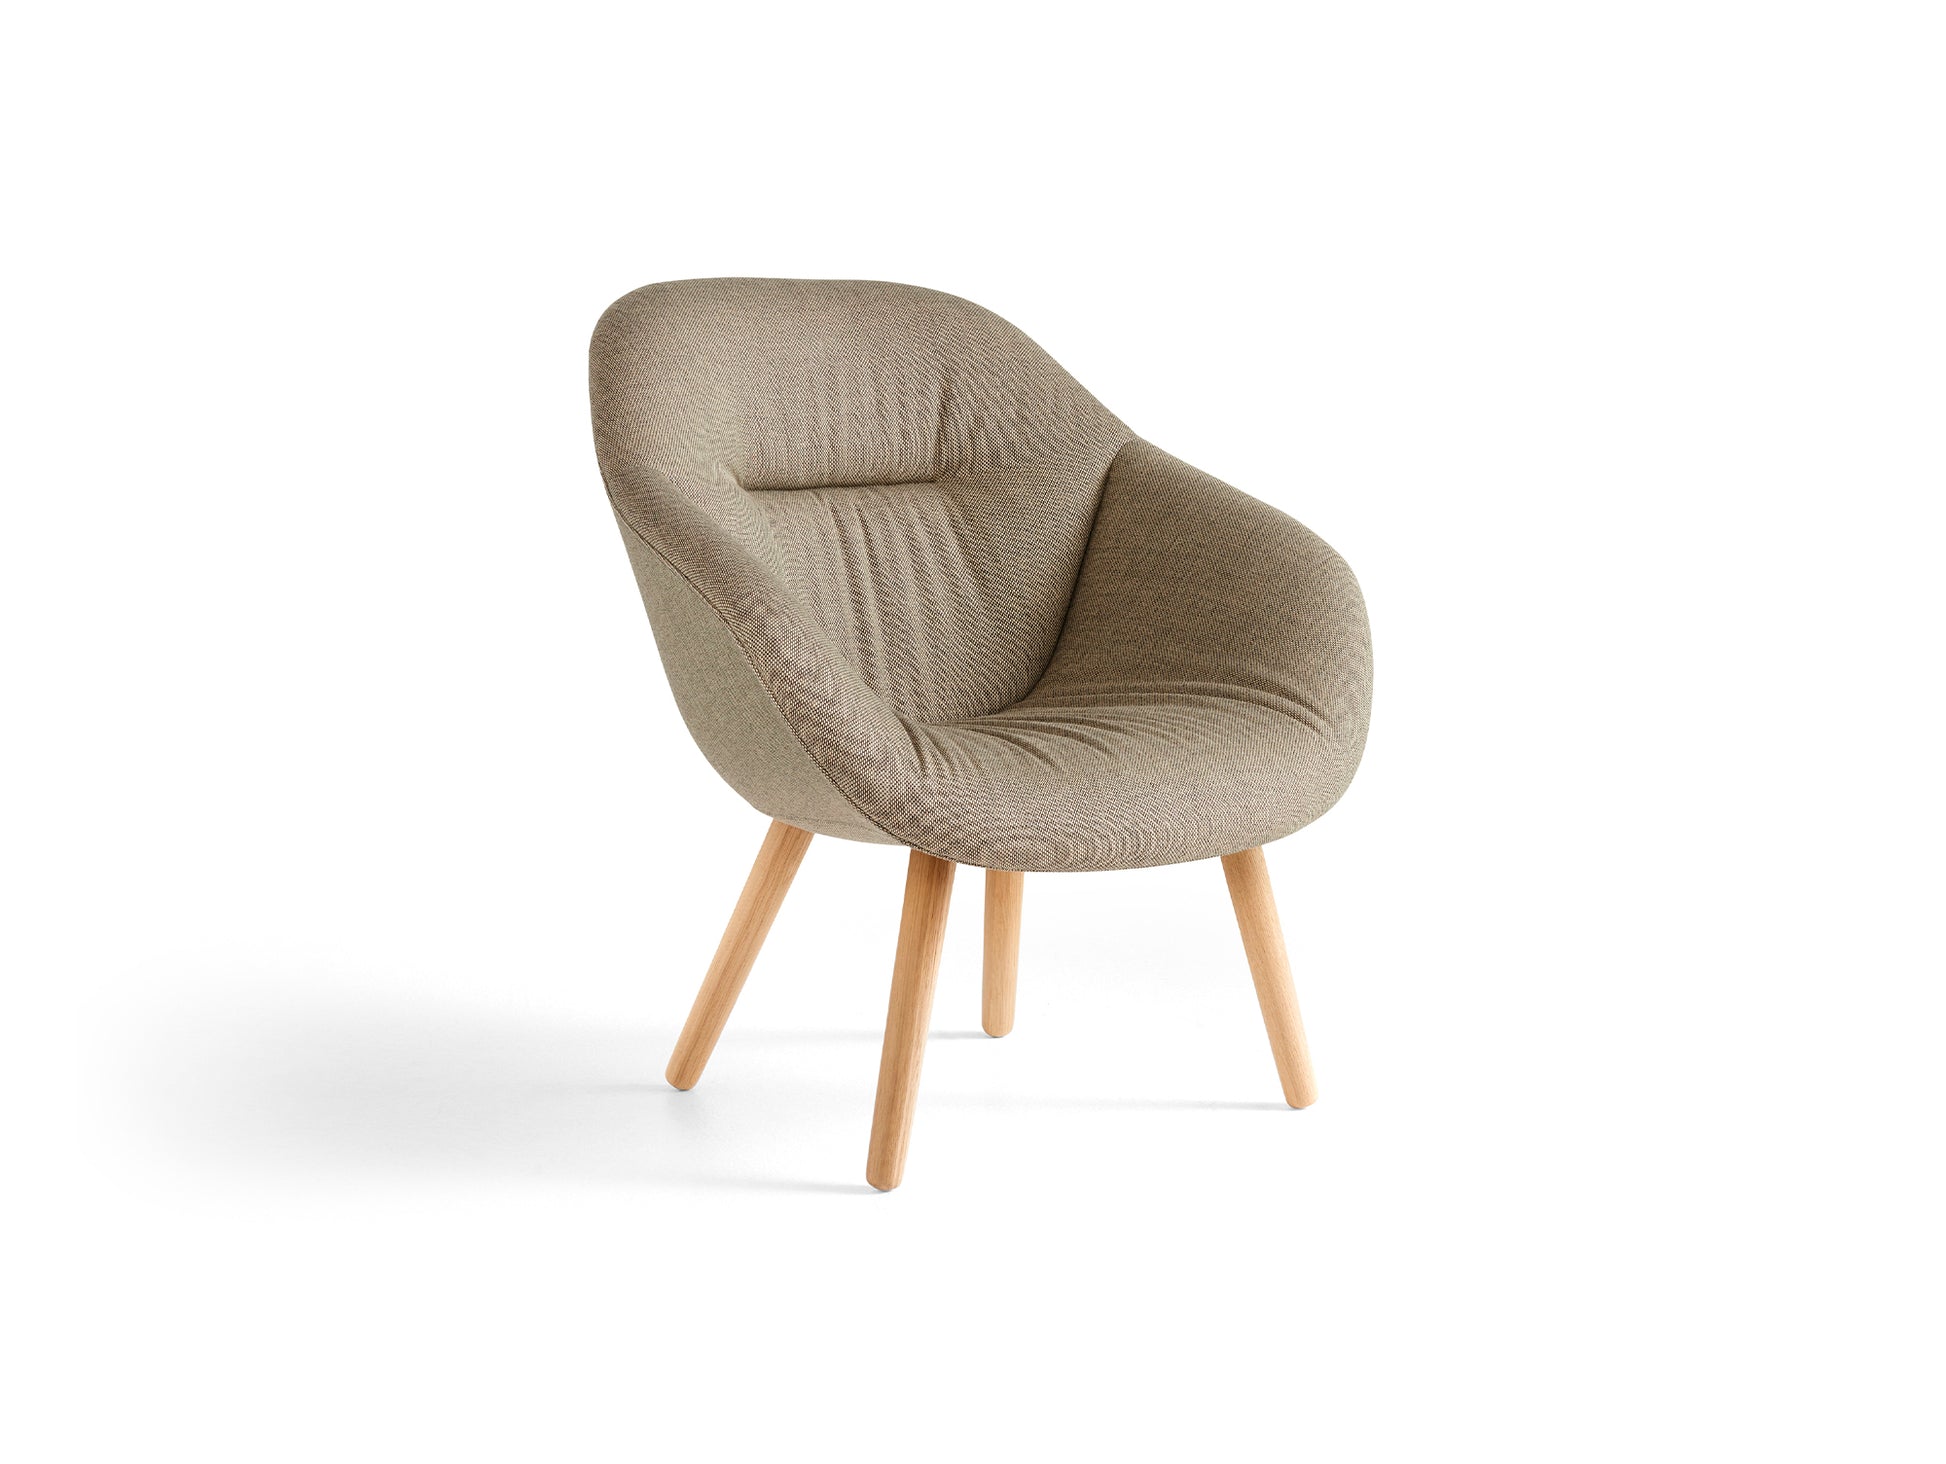 About A Lounge Chair - AAL 82 Soft by HAY / Re-wool 218 / Lacquered Oak Base